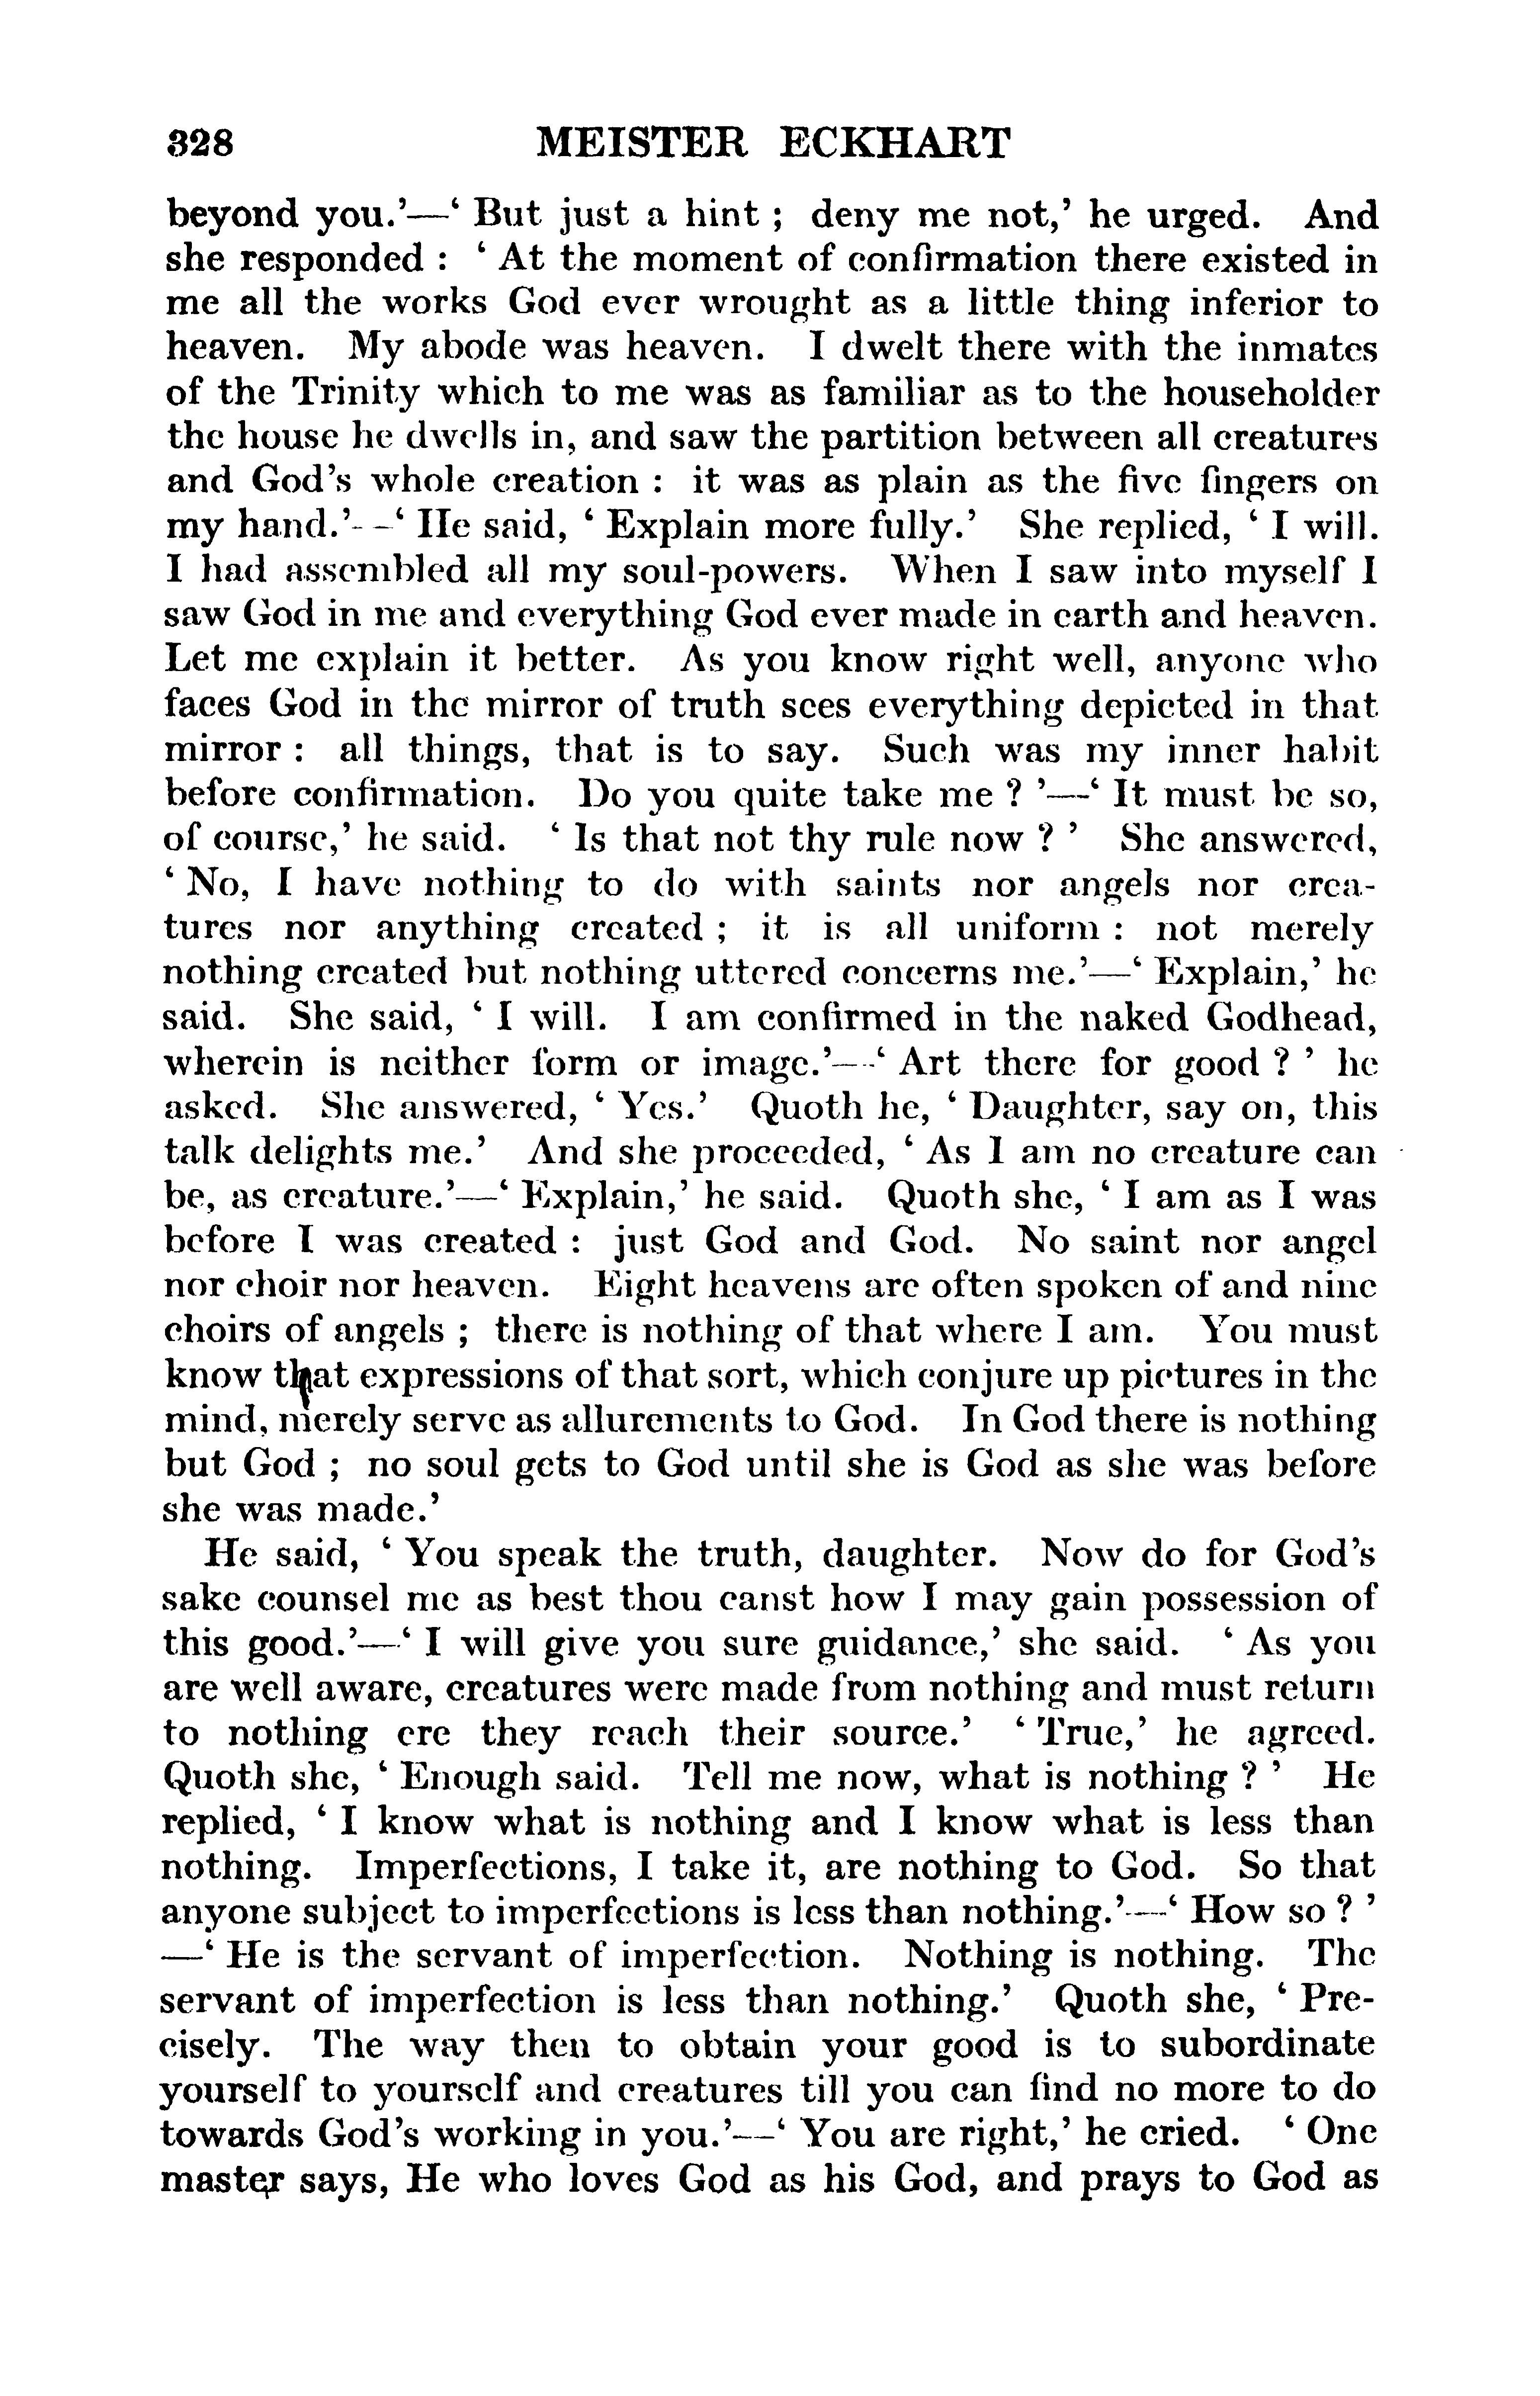 Image of page 0352